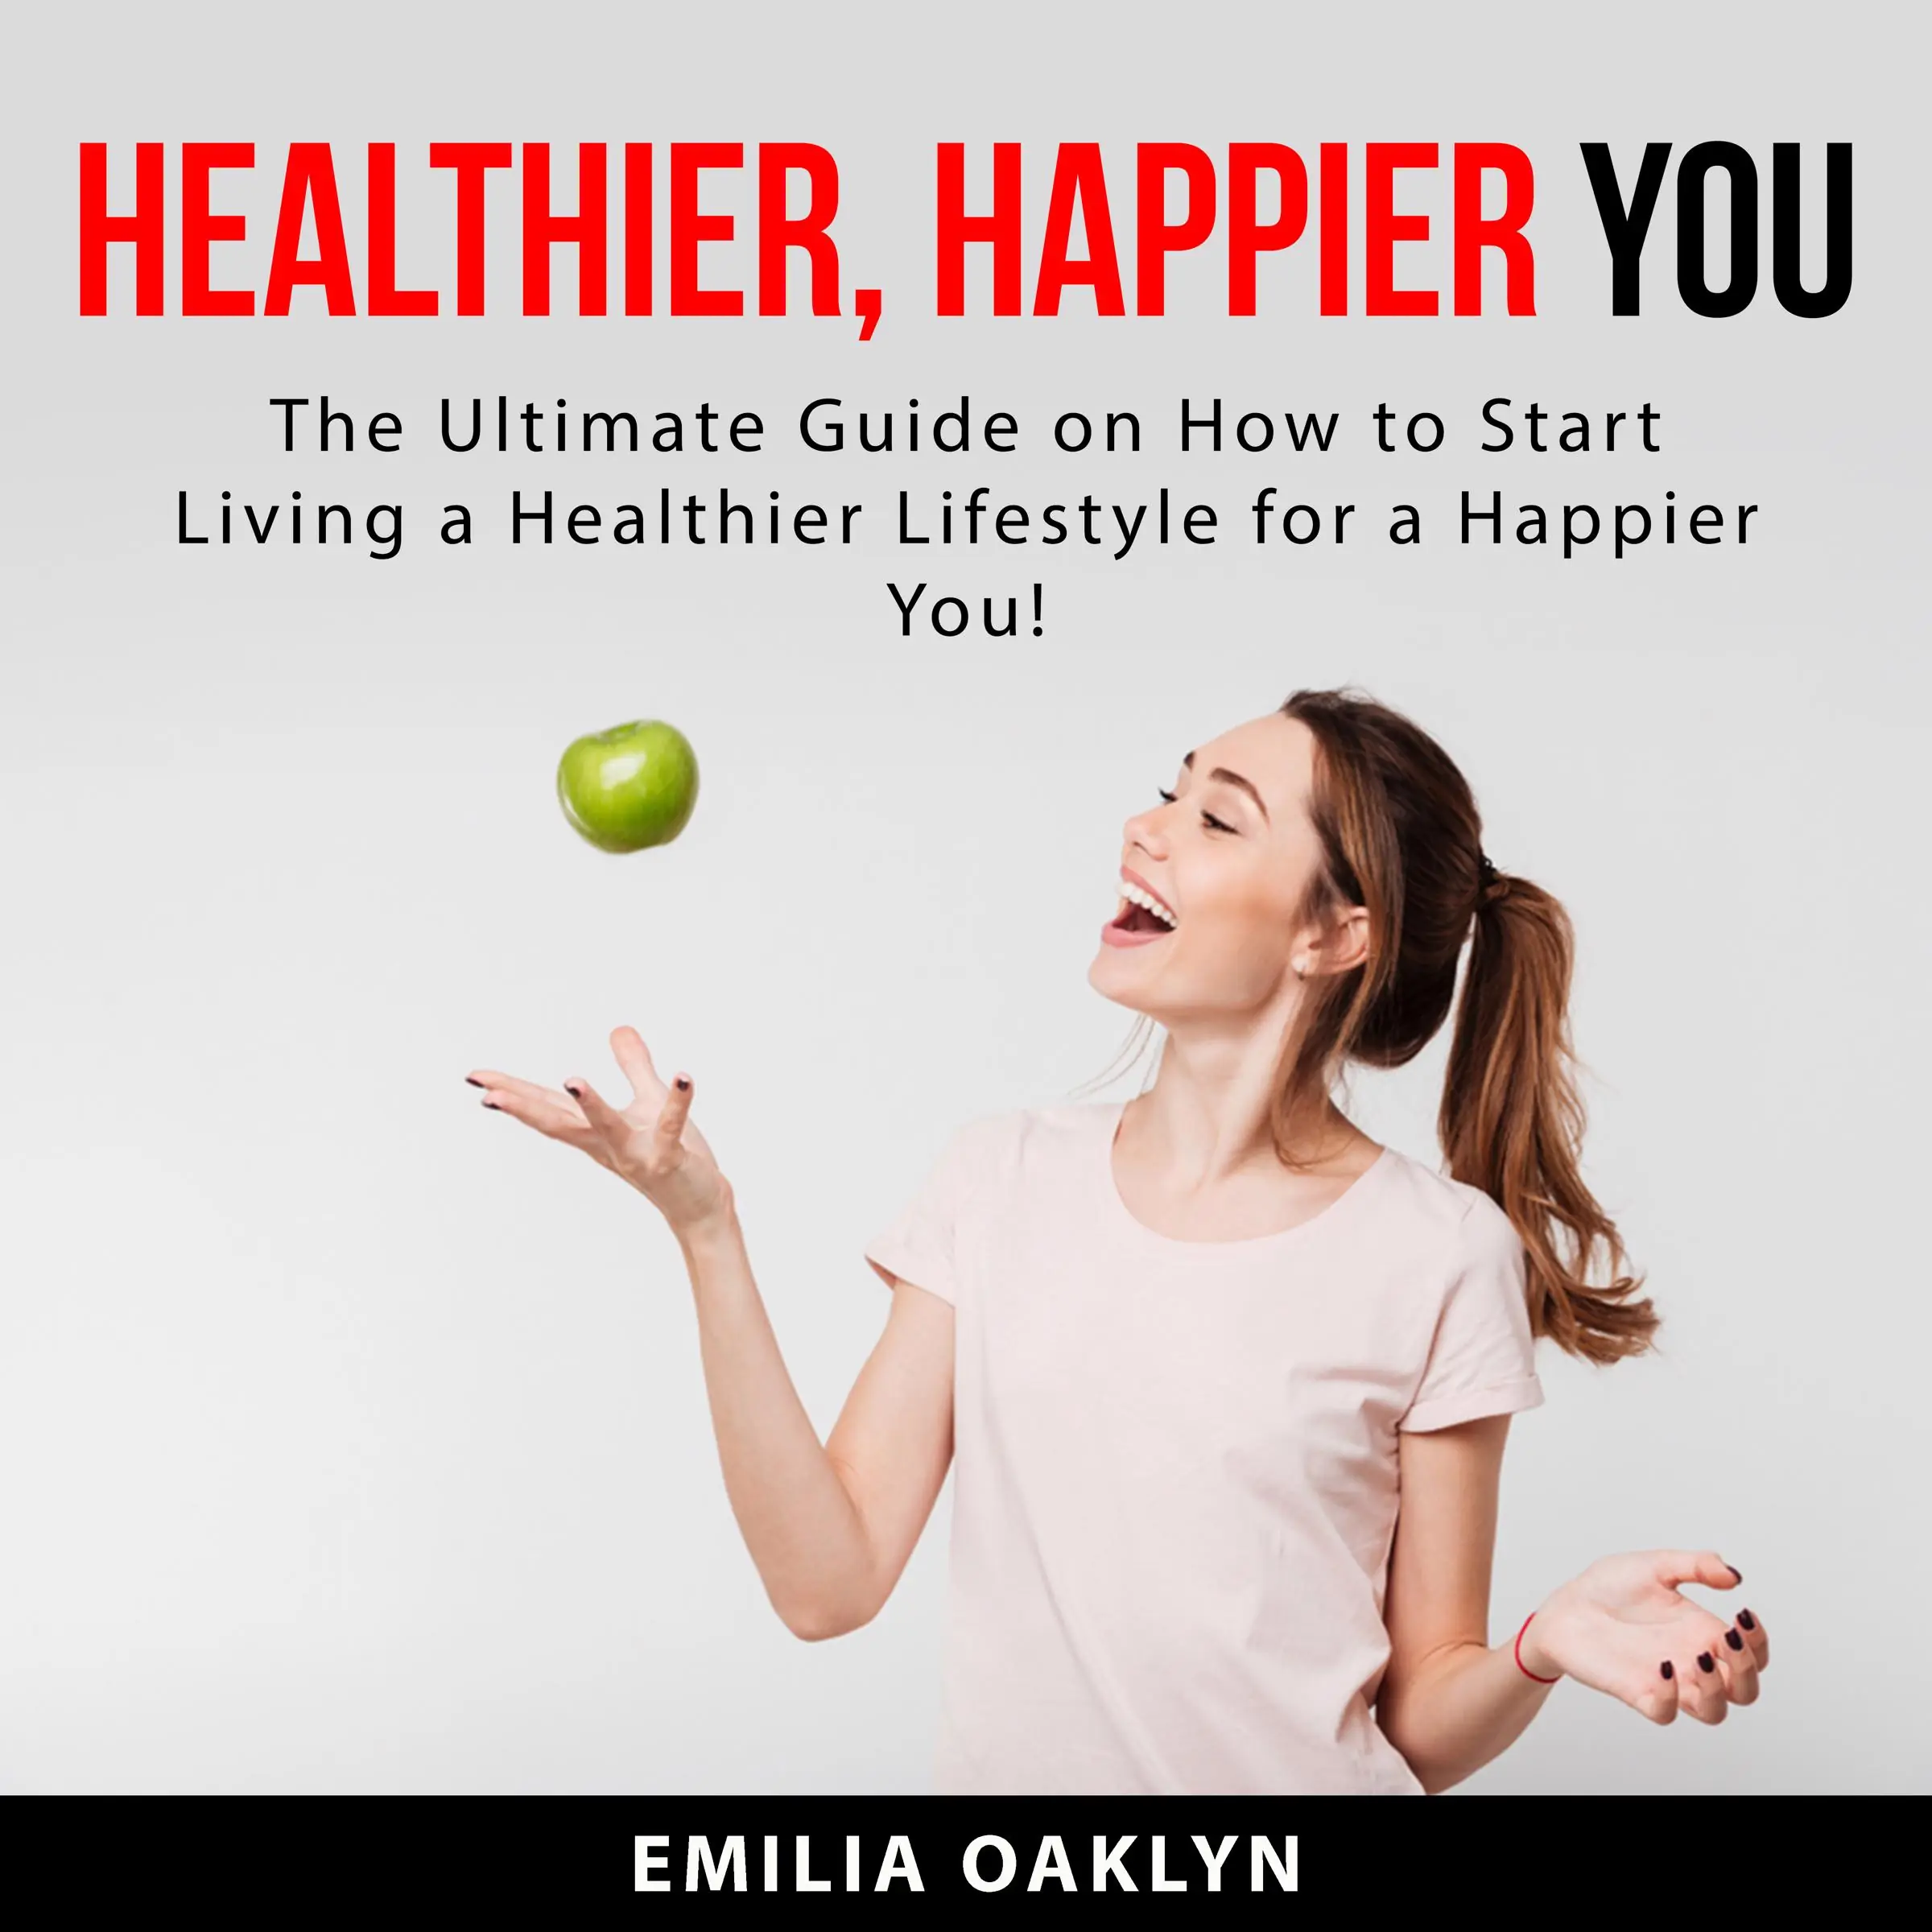 Healthier, Happier You: The Ultimate Guide on How to Start Living a Healthier Lifestyle for a Happier You! Audiobook by Emilia Oaklyn